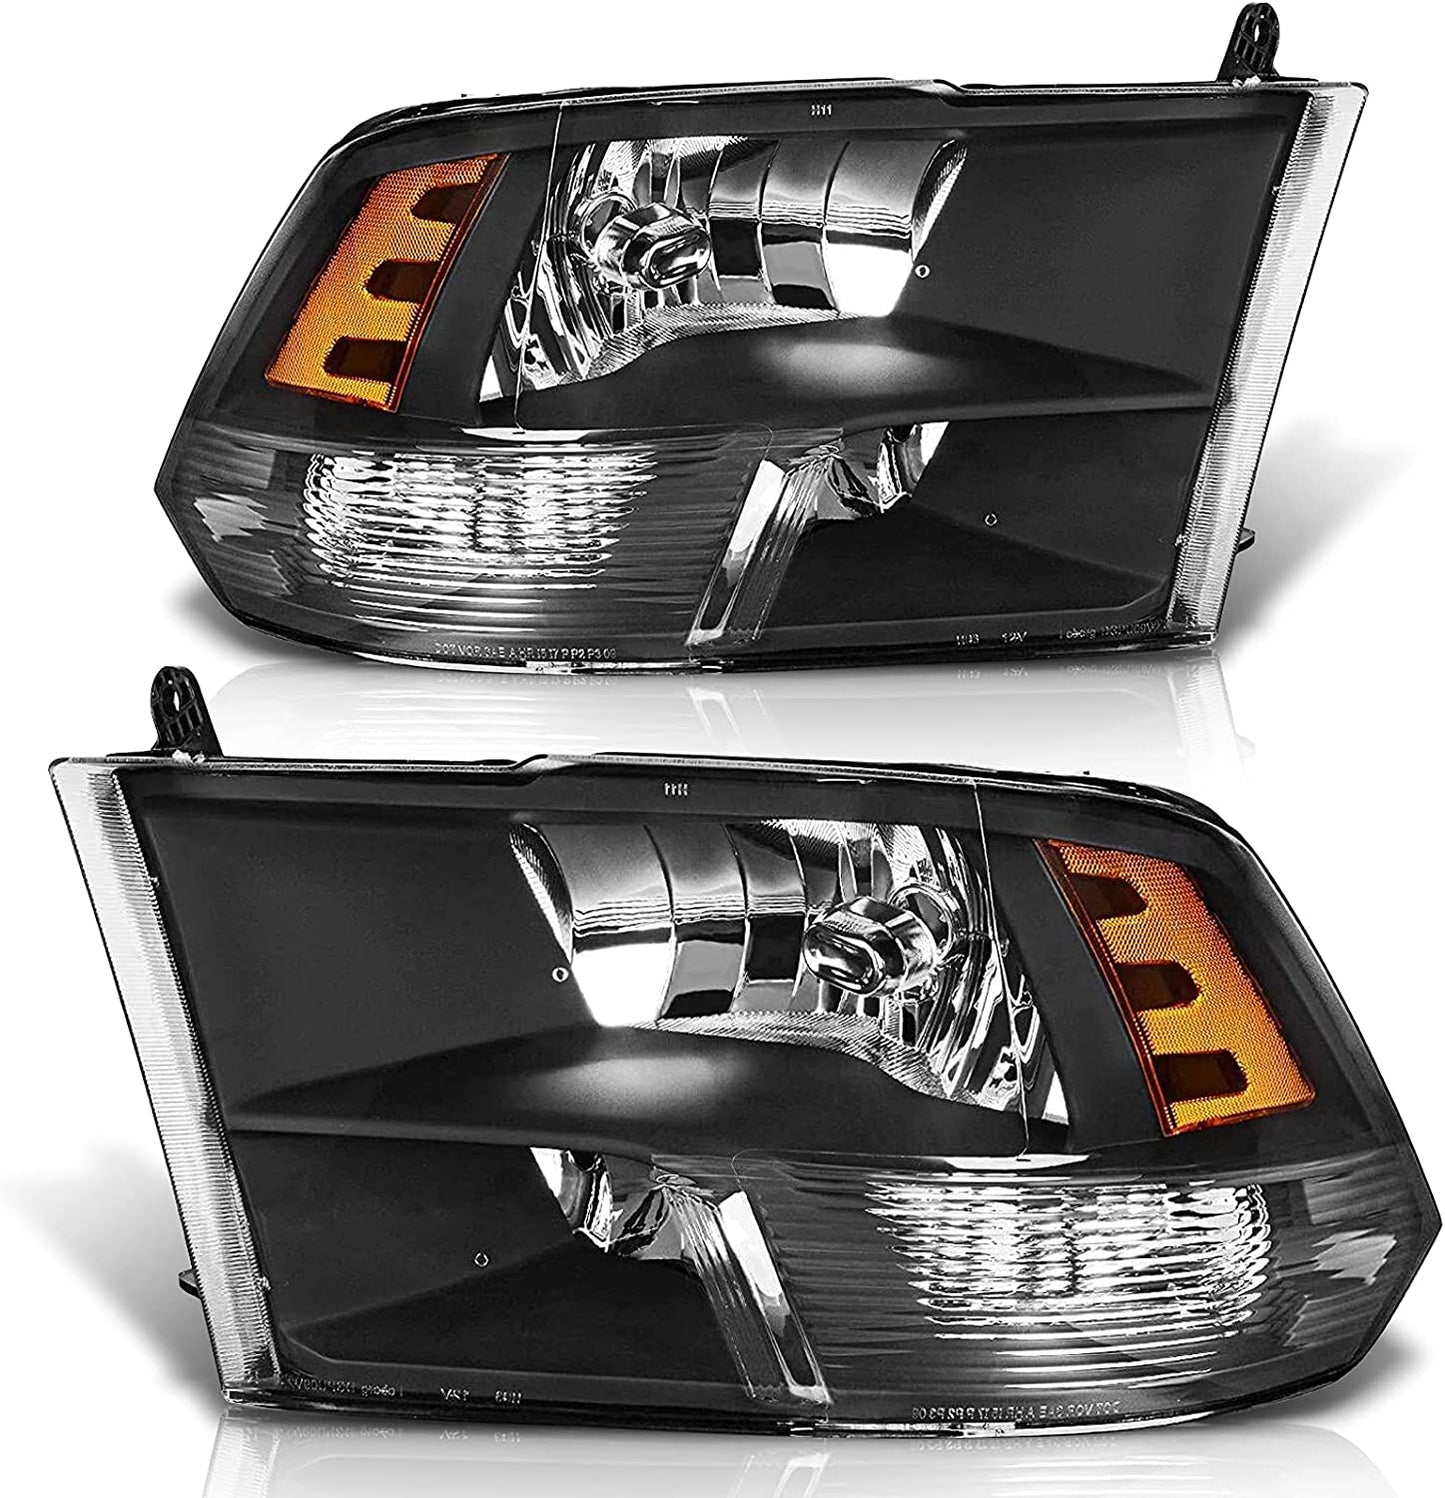 ADCARLIGHTS For 2009-2018 Dodge Ram Headlight Assembly Compatible with Ram 1500 / Ram 2500 3500 / 2010-2018 / Ram 2500 3500 / 2019-2021 Ram 1500 Classic, Chrome Housing Amber Reflector Replacement